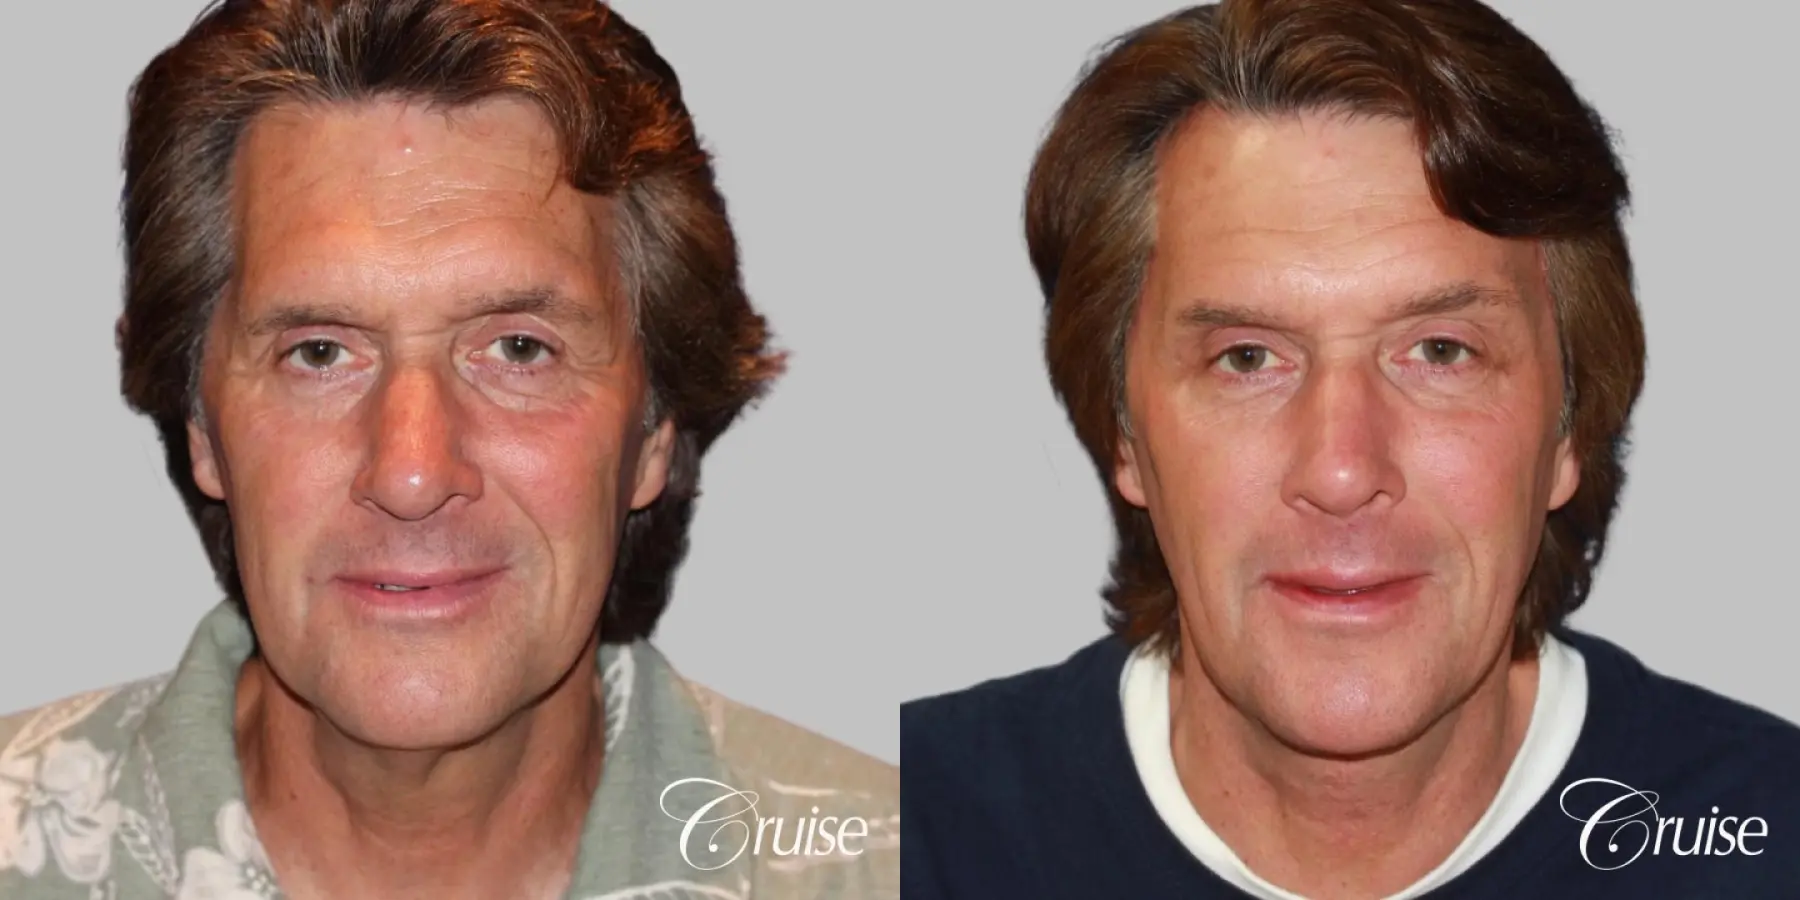 Neck Lift with Liposuction Jawline - Before and After  